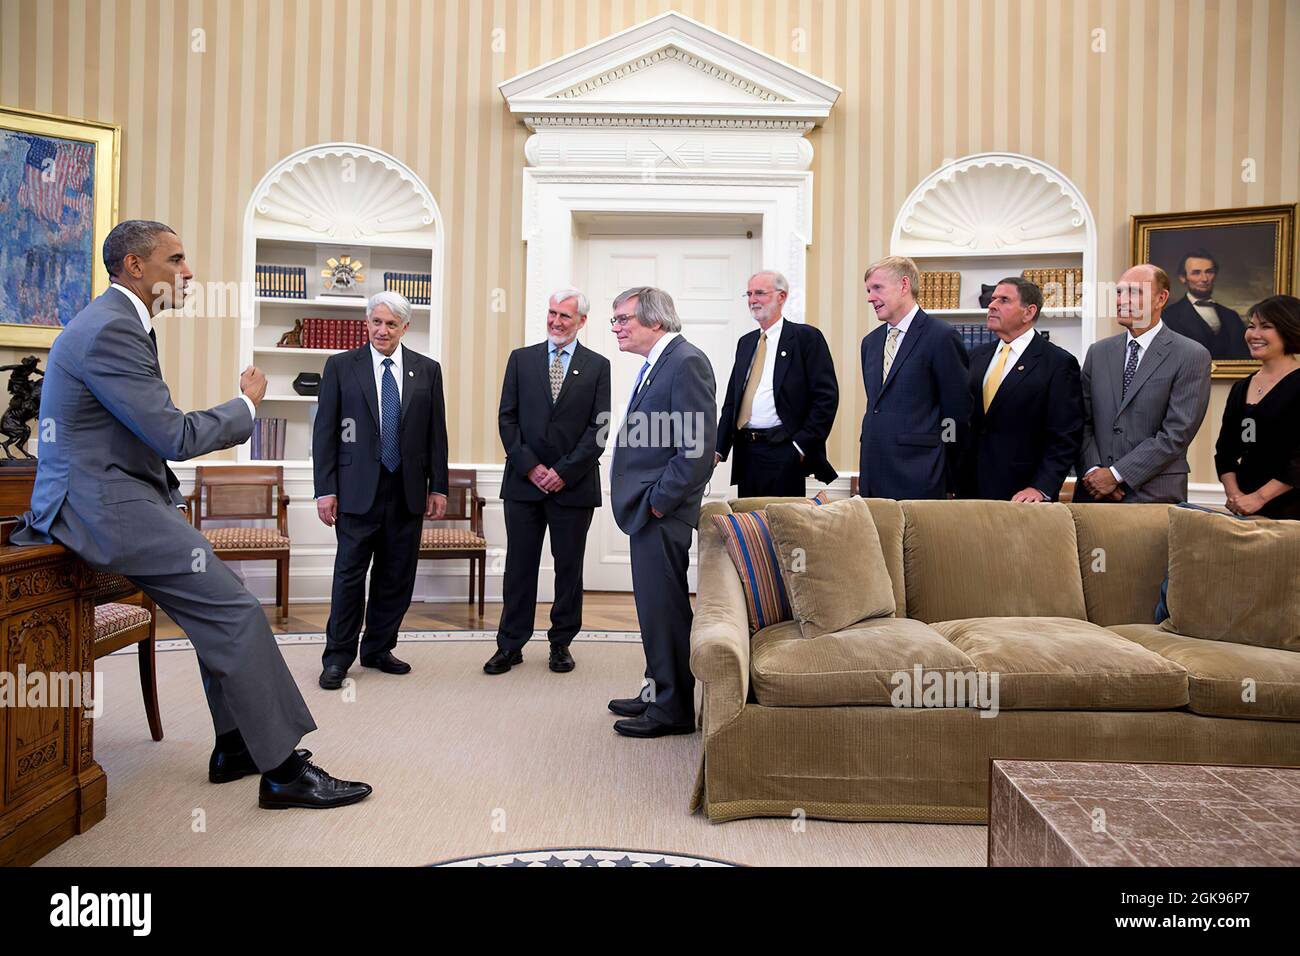 President Barack Obama greets four of the nine 2014 Kavli Prize laureates with representatives from the Kavli Foundation and other guests in the Oval Office, July 31, 2014. The 2014 Kavli Prize laureates were selected for making fundamental contributions to the theory of cosmic inflation, to our understanding of the resolution limits of optical microscopy, and for the discovery of specialized brain networks for memory and cognition. (Official White House Photo by Pete Souza) This official White House photograph is being made available only for publication by news organizations and/or for perso Stock Photo